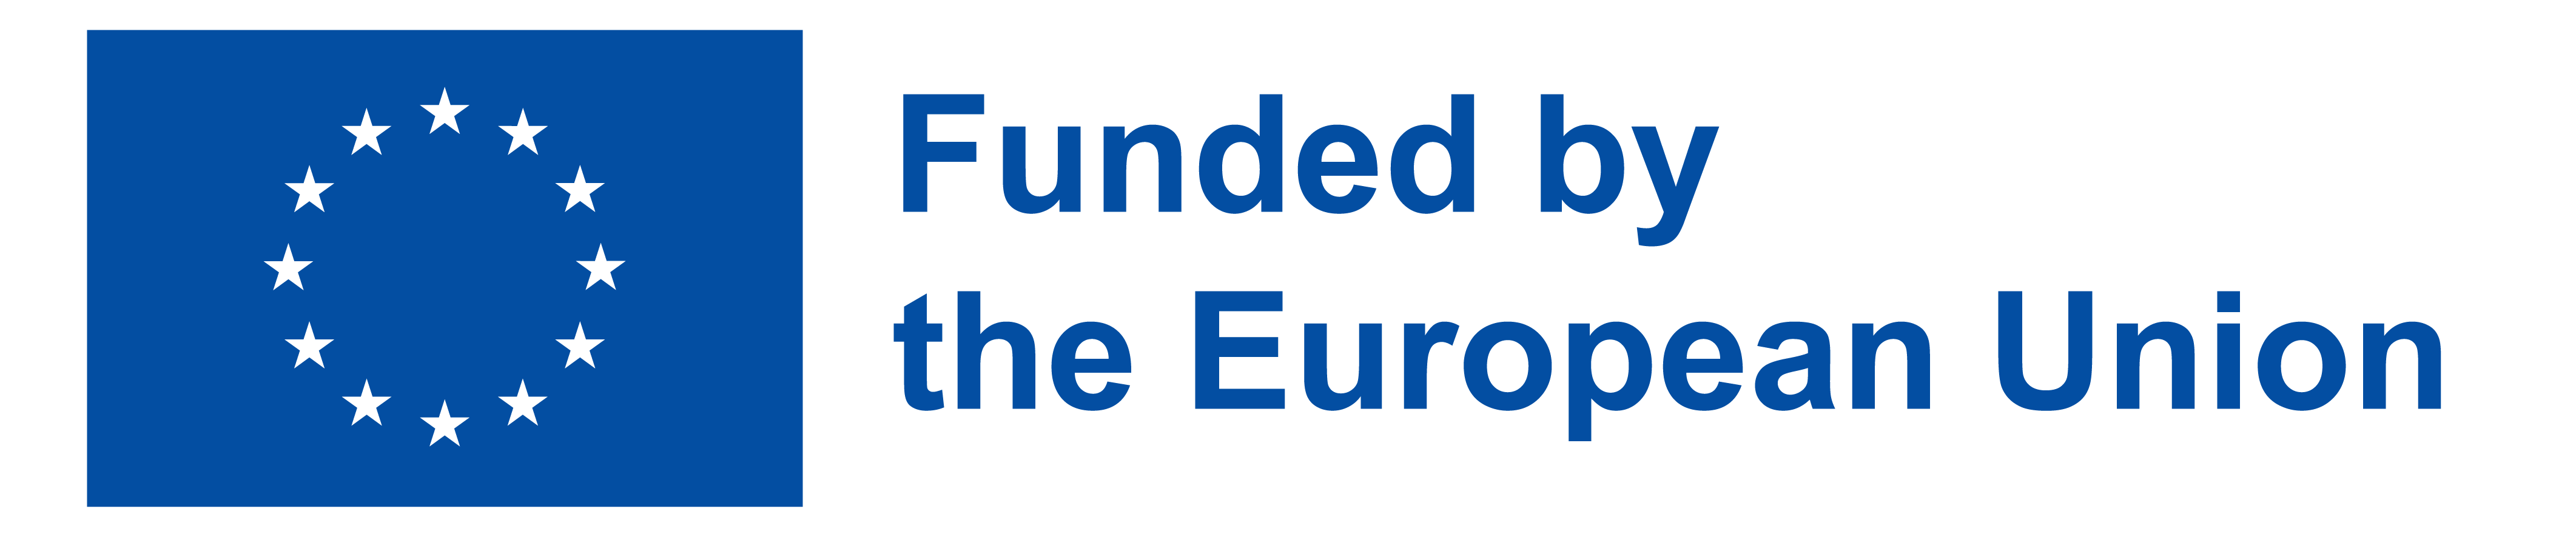 European Union logo for public funded projects